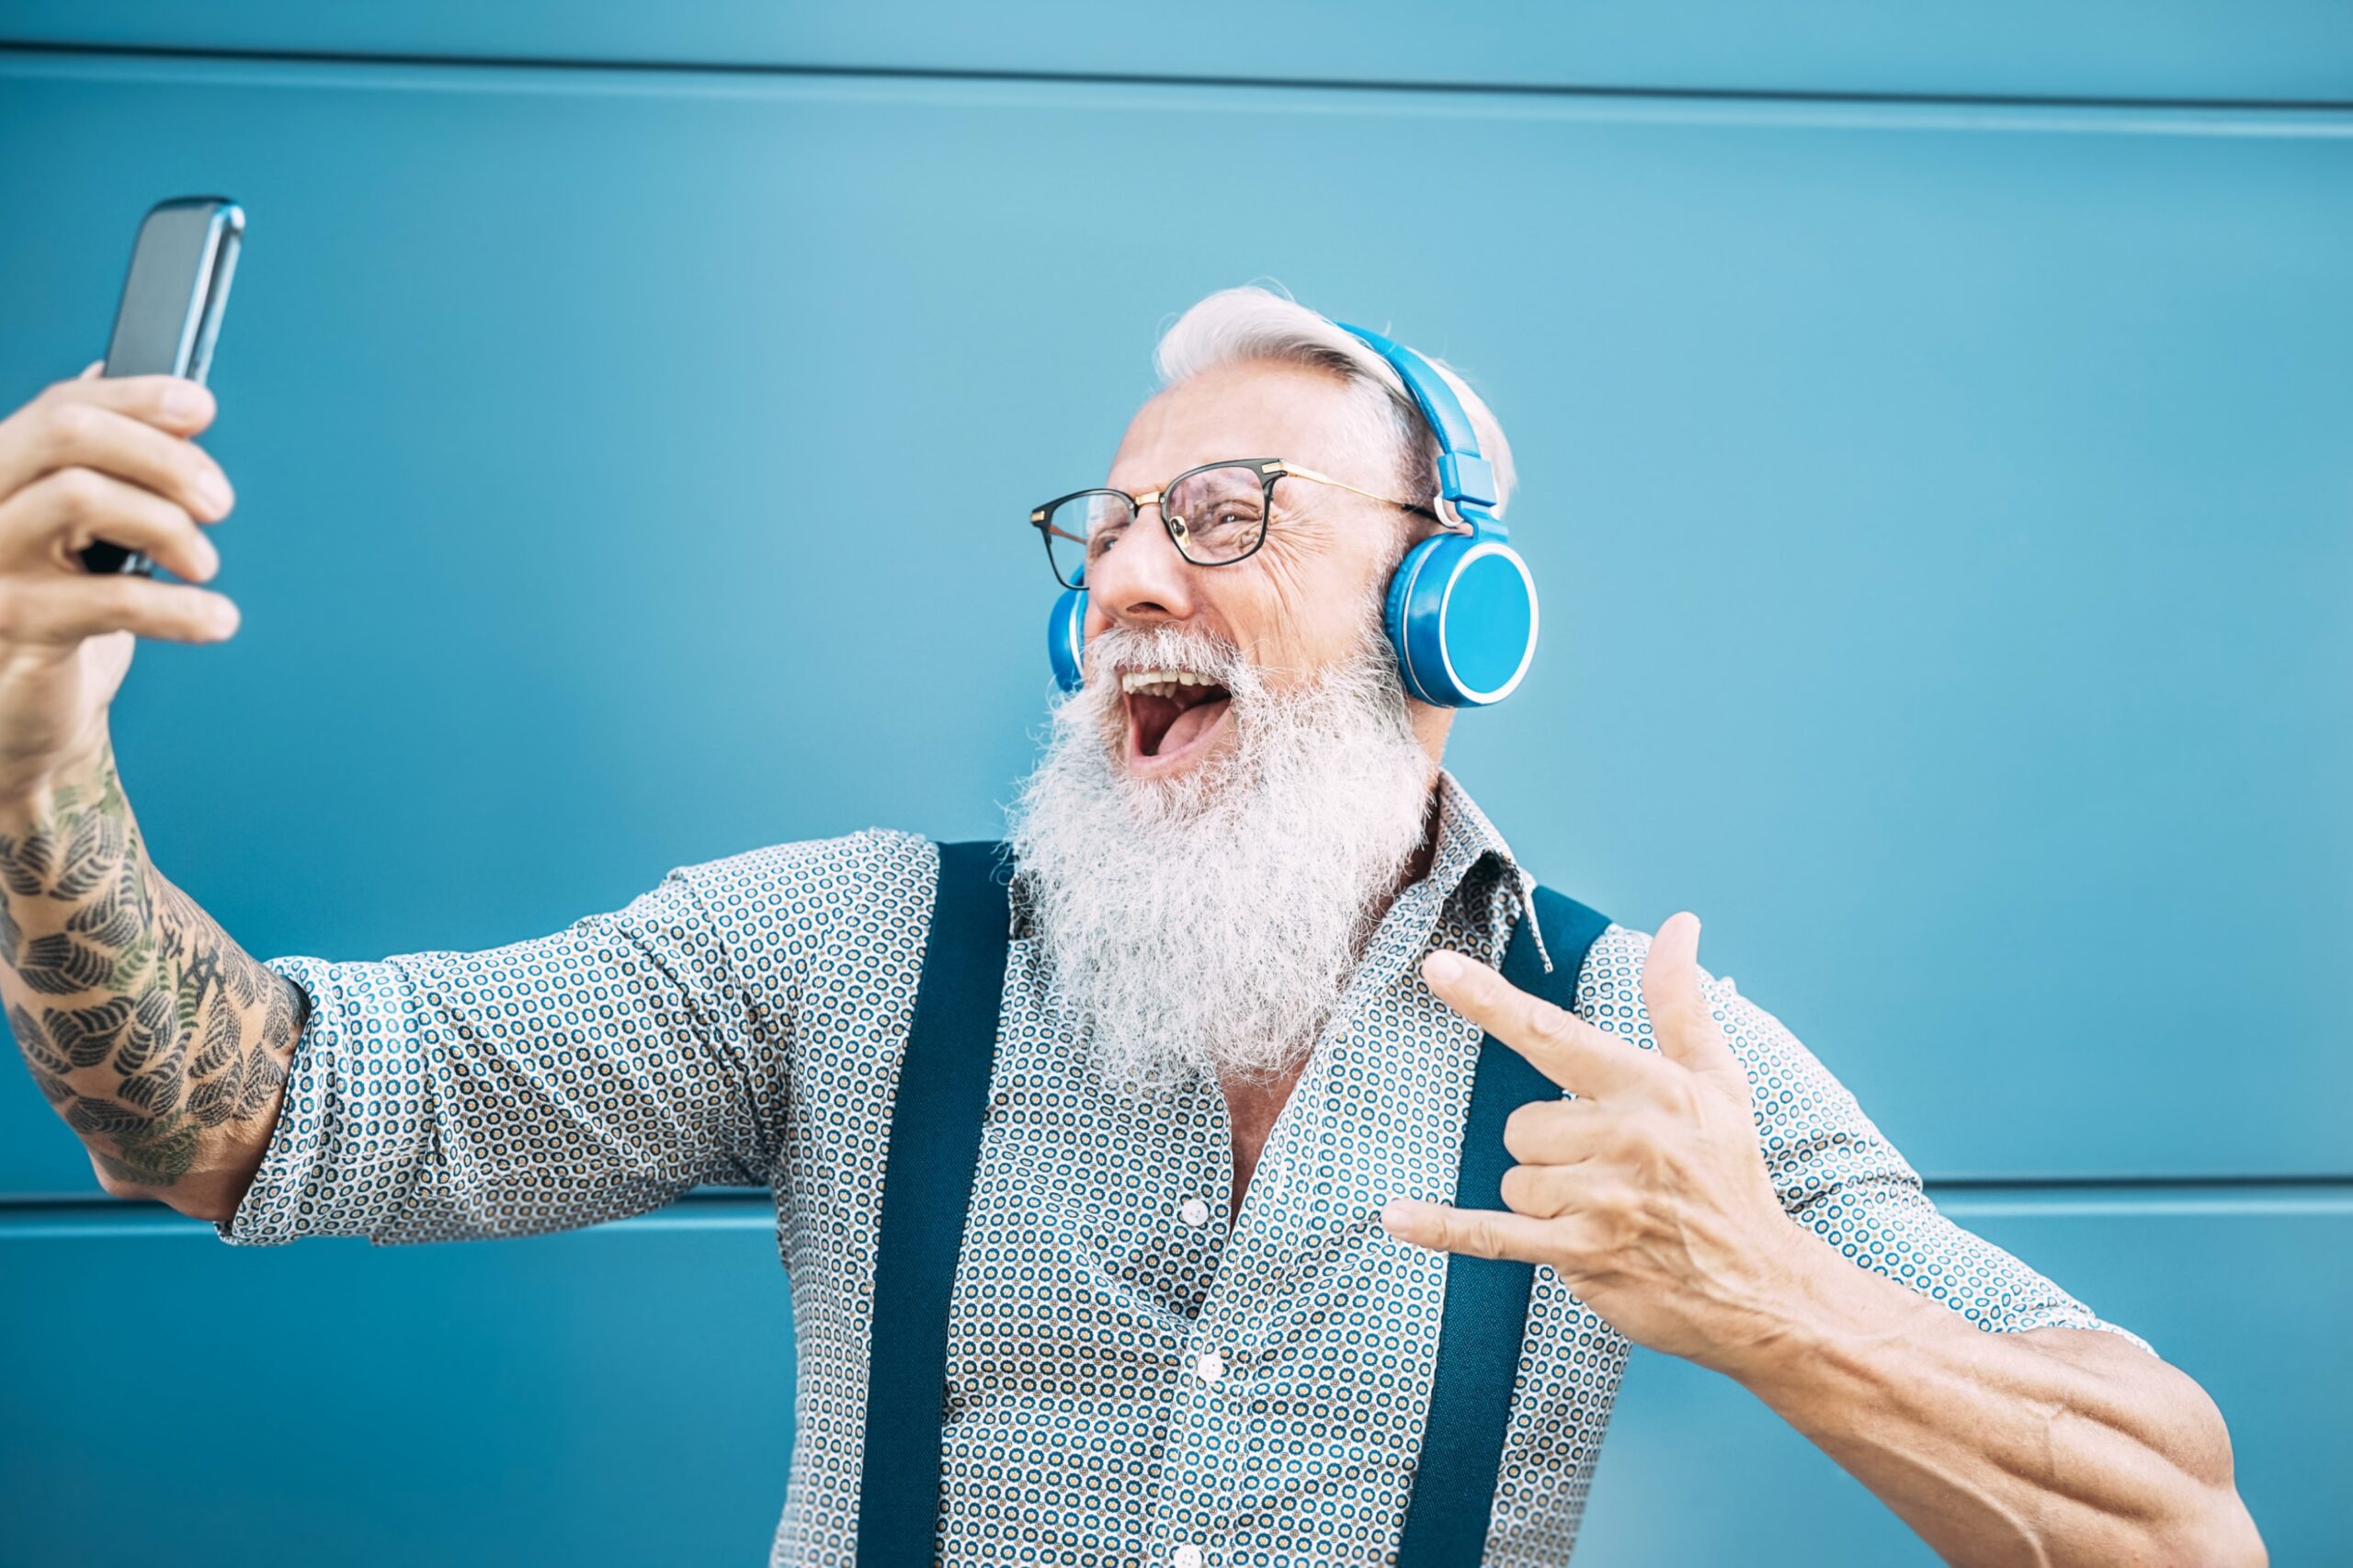 Musical Tests Can Detect Mental Deterioration In Old Age